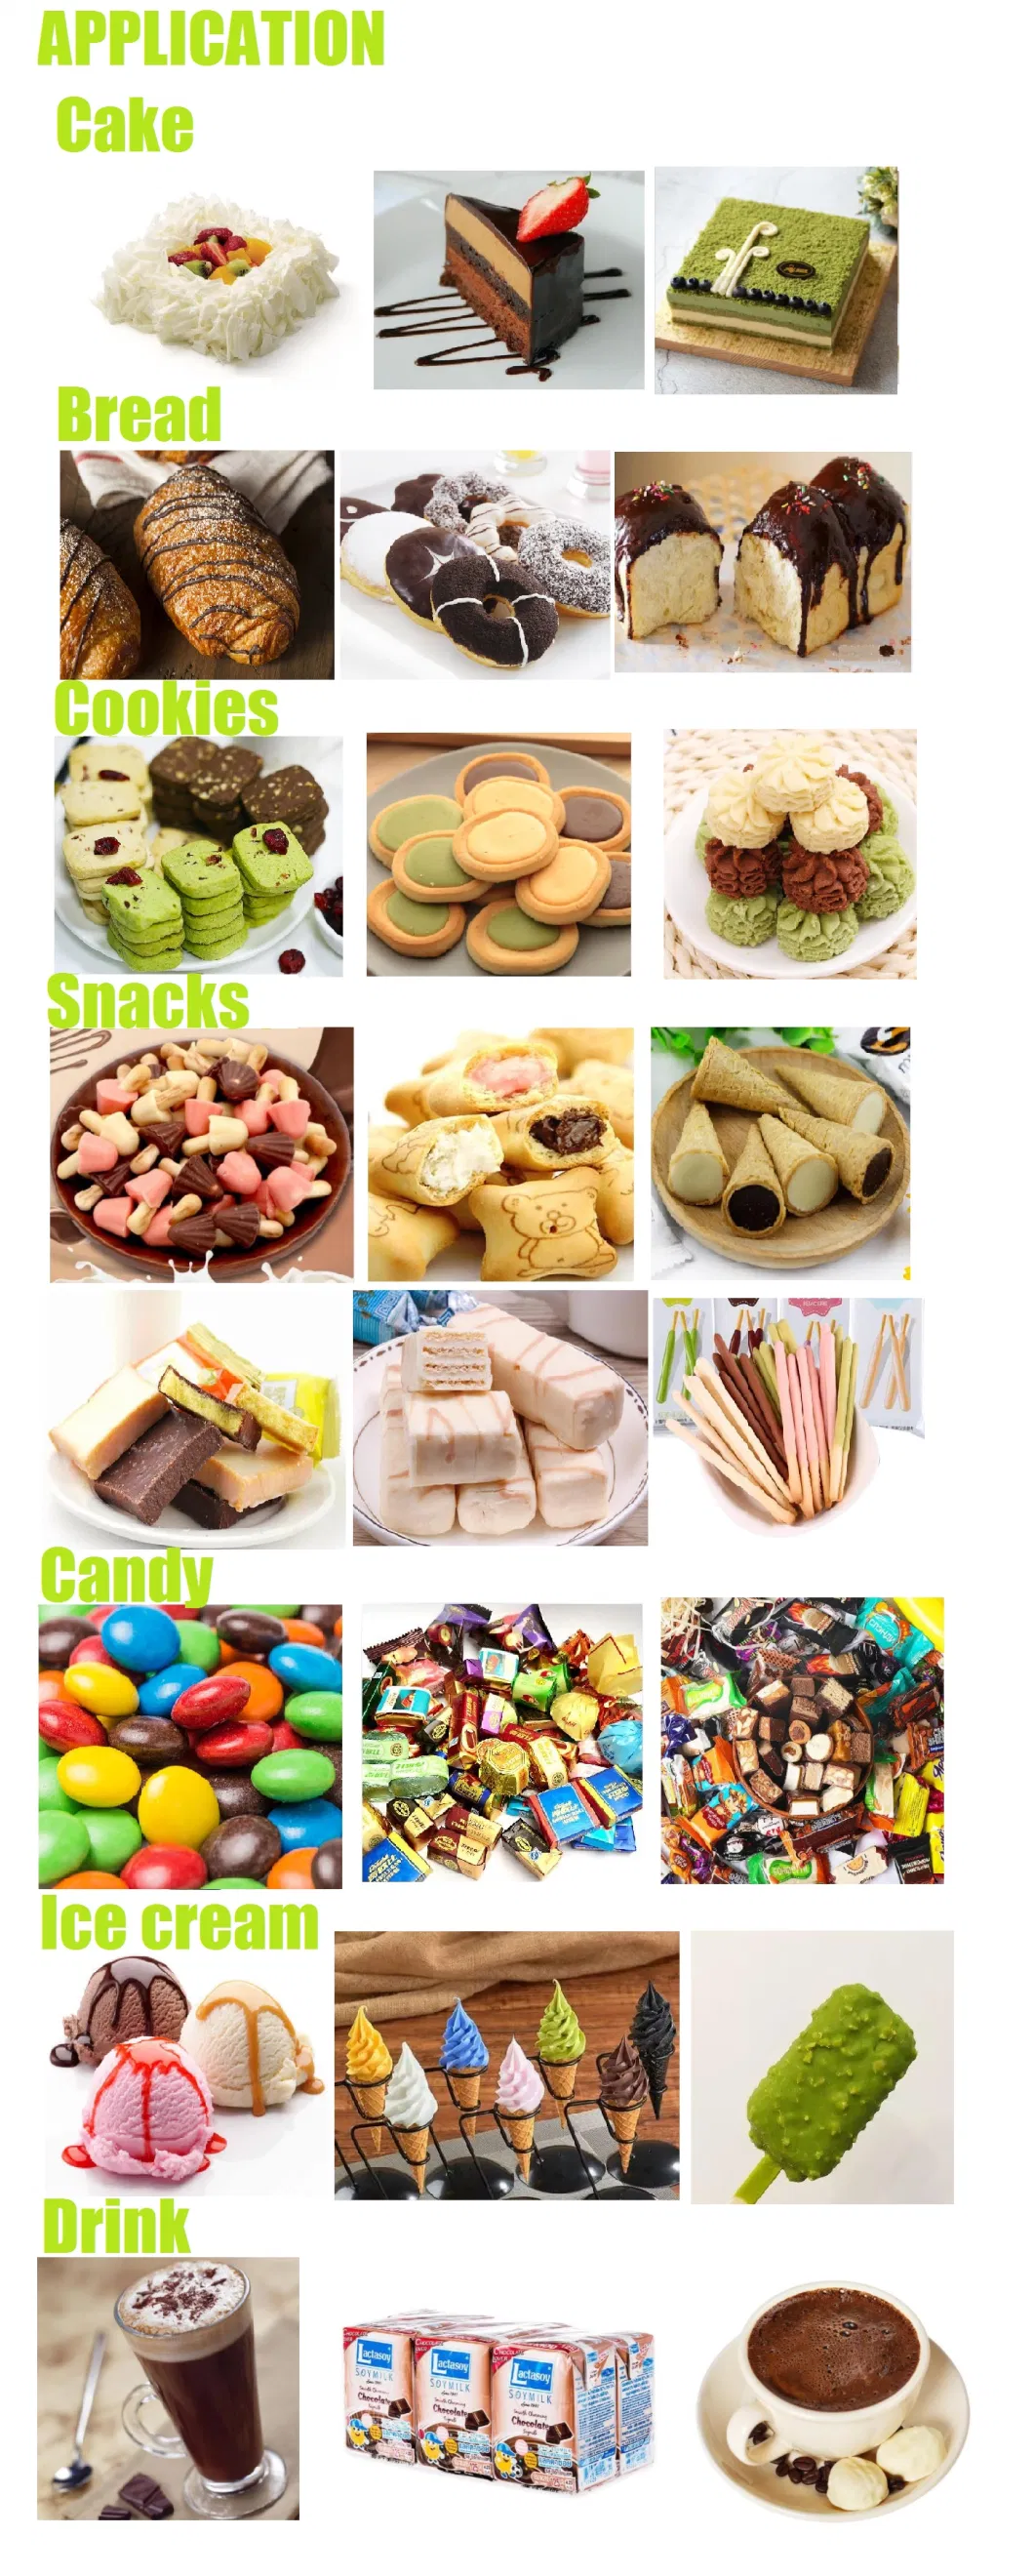 Food Additive Bakery Chocolate for Cakes, Bread and Cookies